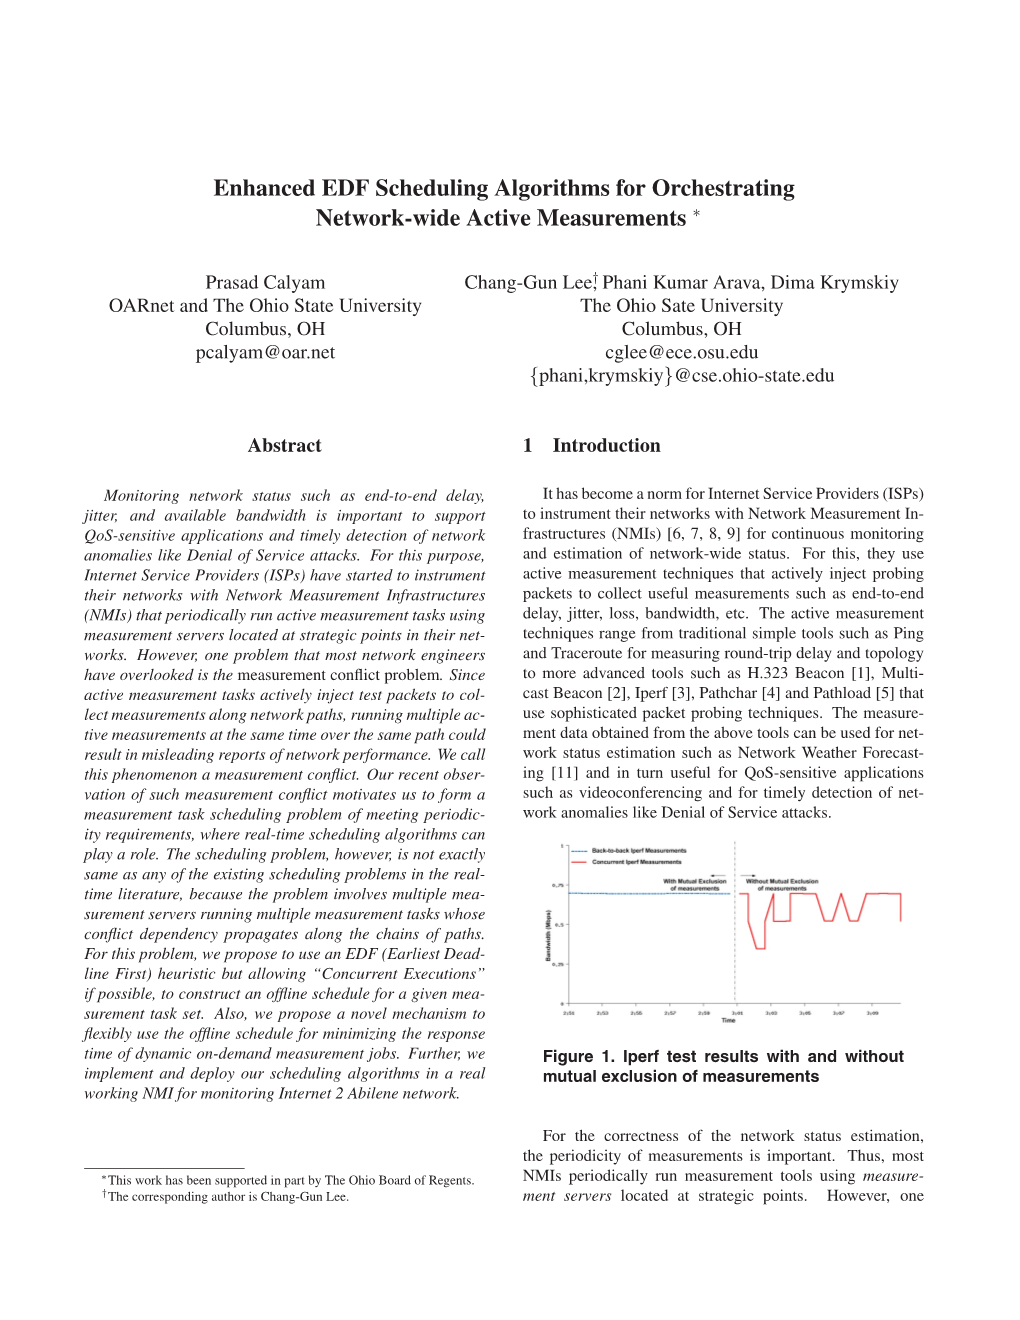 Enhanced EDF Scheduling Algorithms for Orchestrating Network-Wide Active Measurements ∗